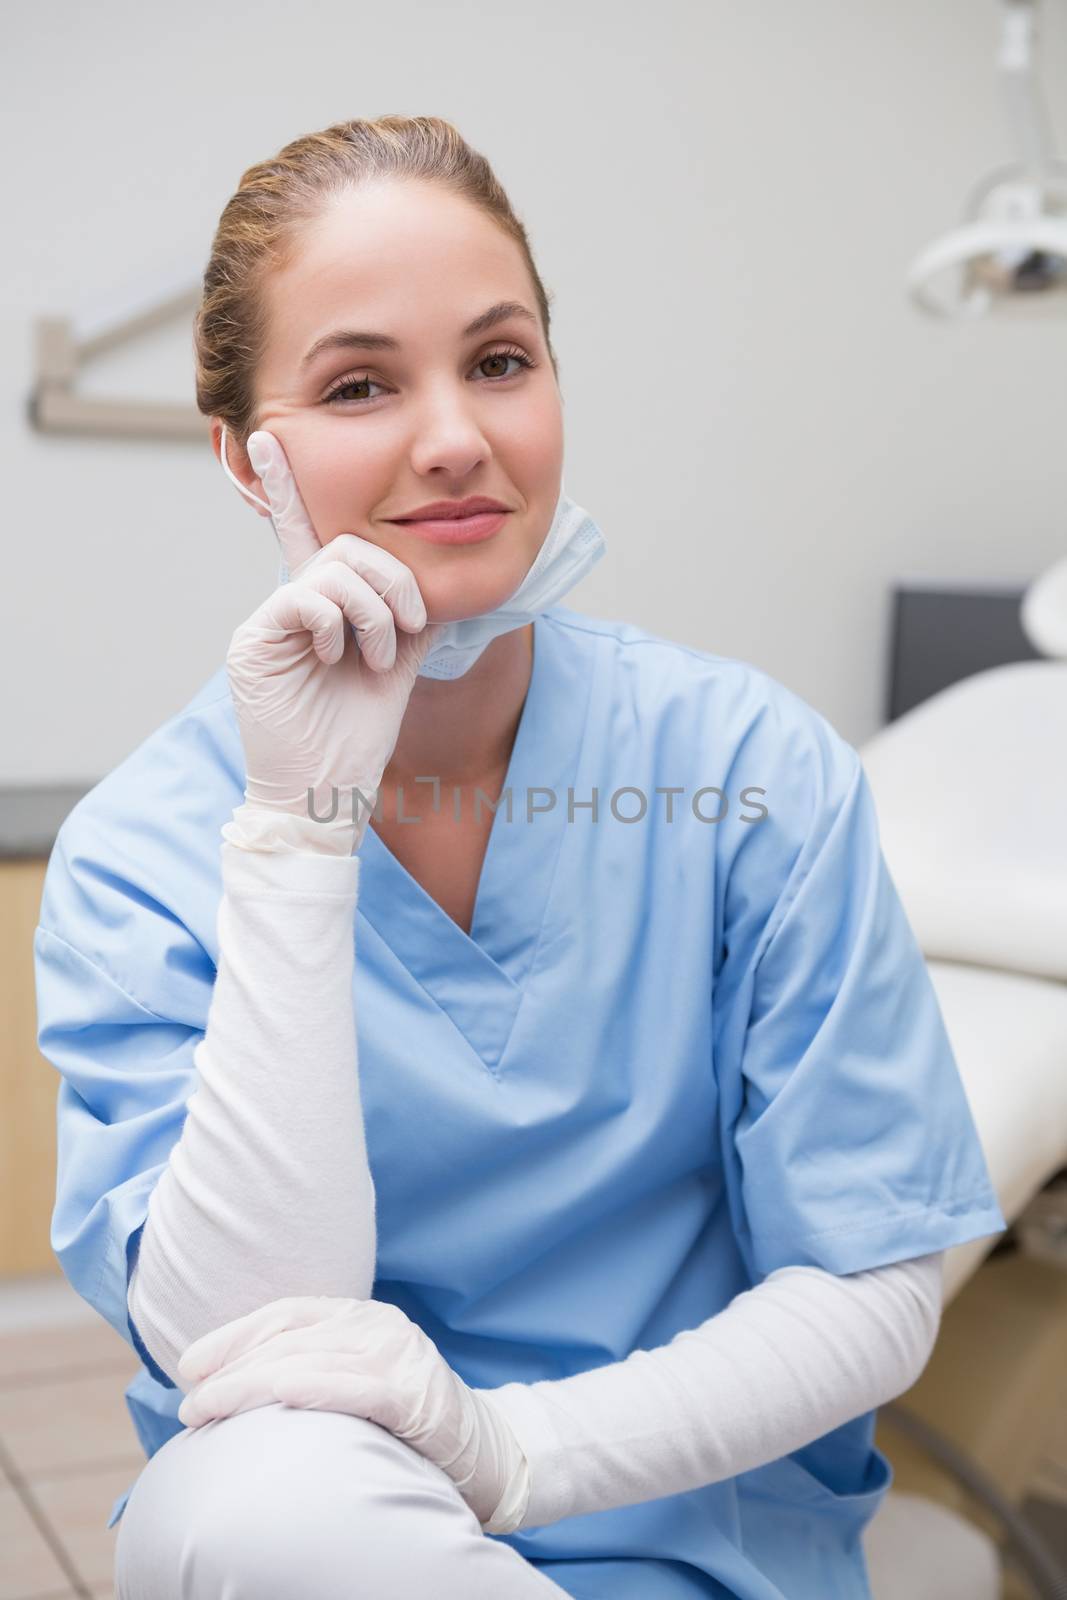 Dentist in blue scrubs smiling at camera at the dental clinic